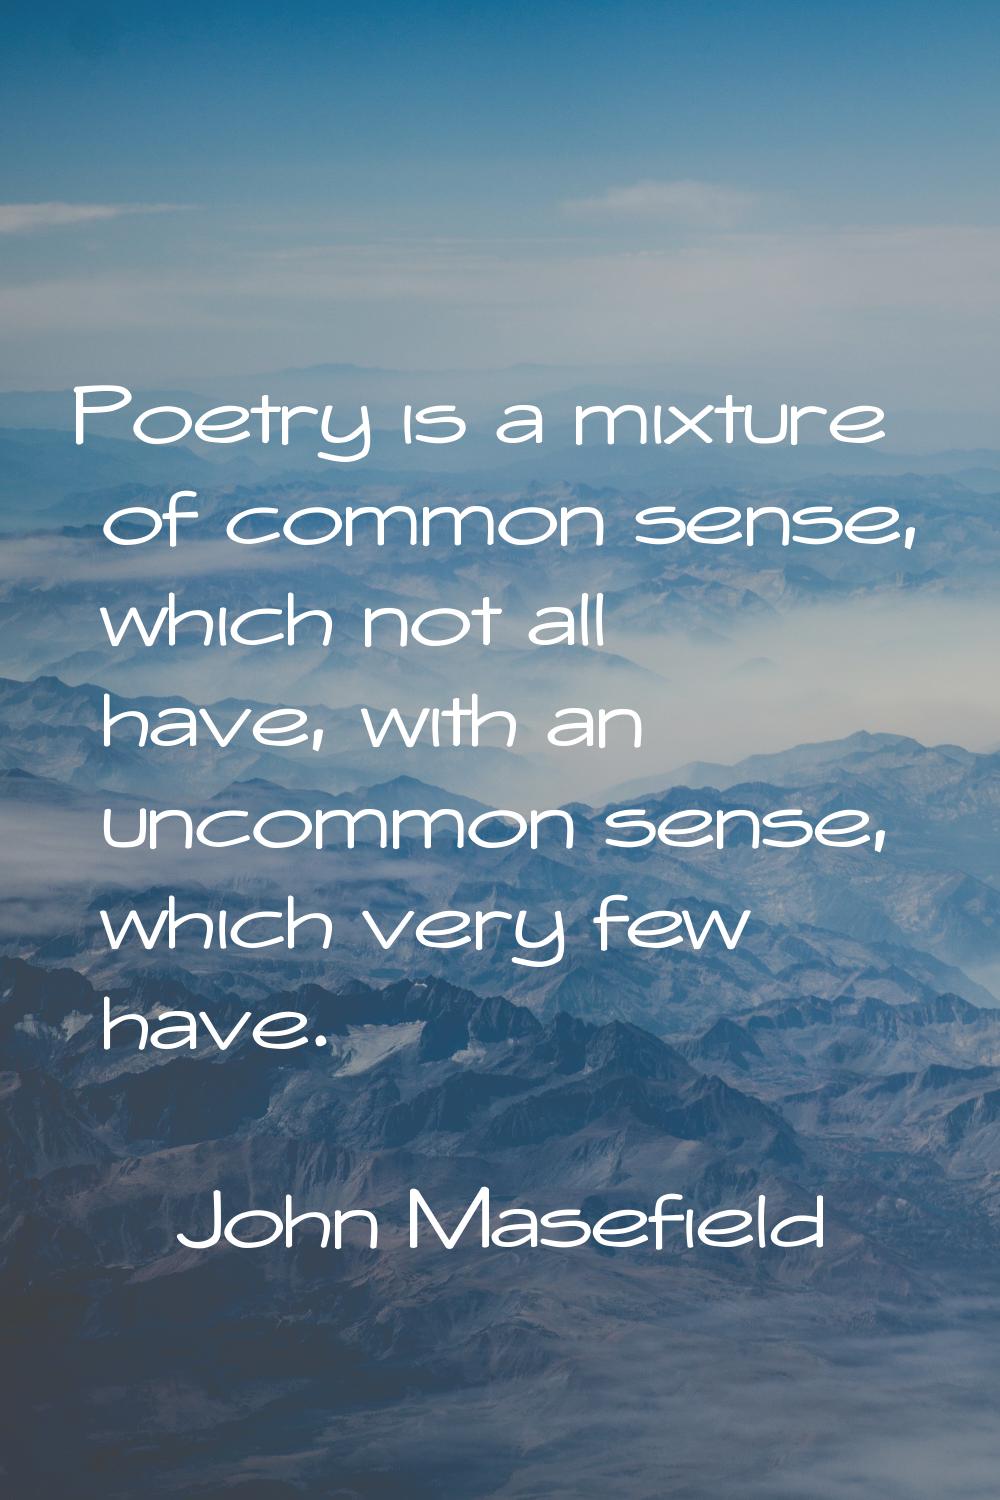 Poetry is a mixture of common sense, which not all have, with an uncommon sense, which very few hav